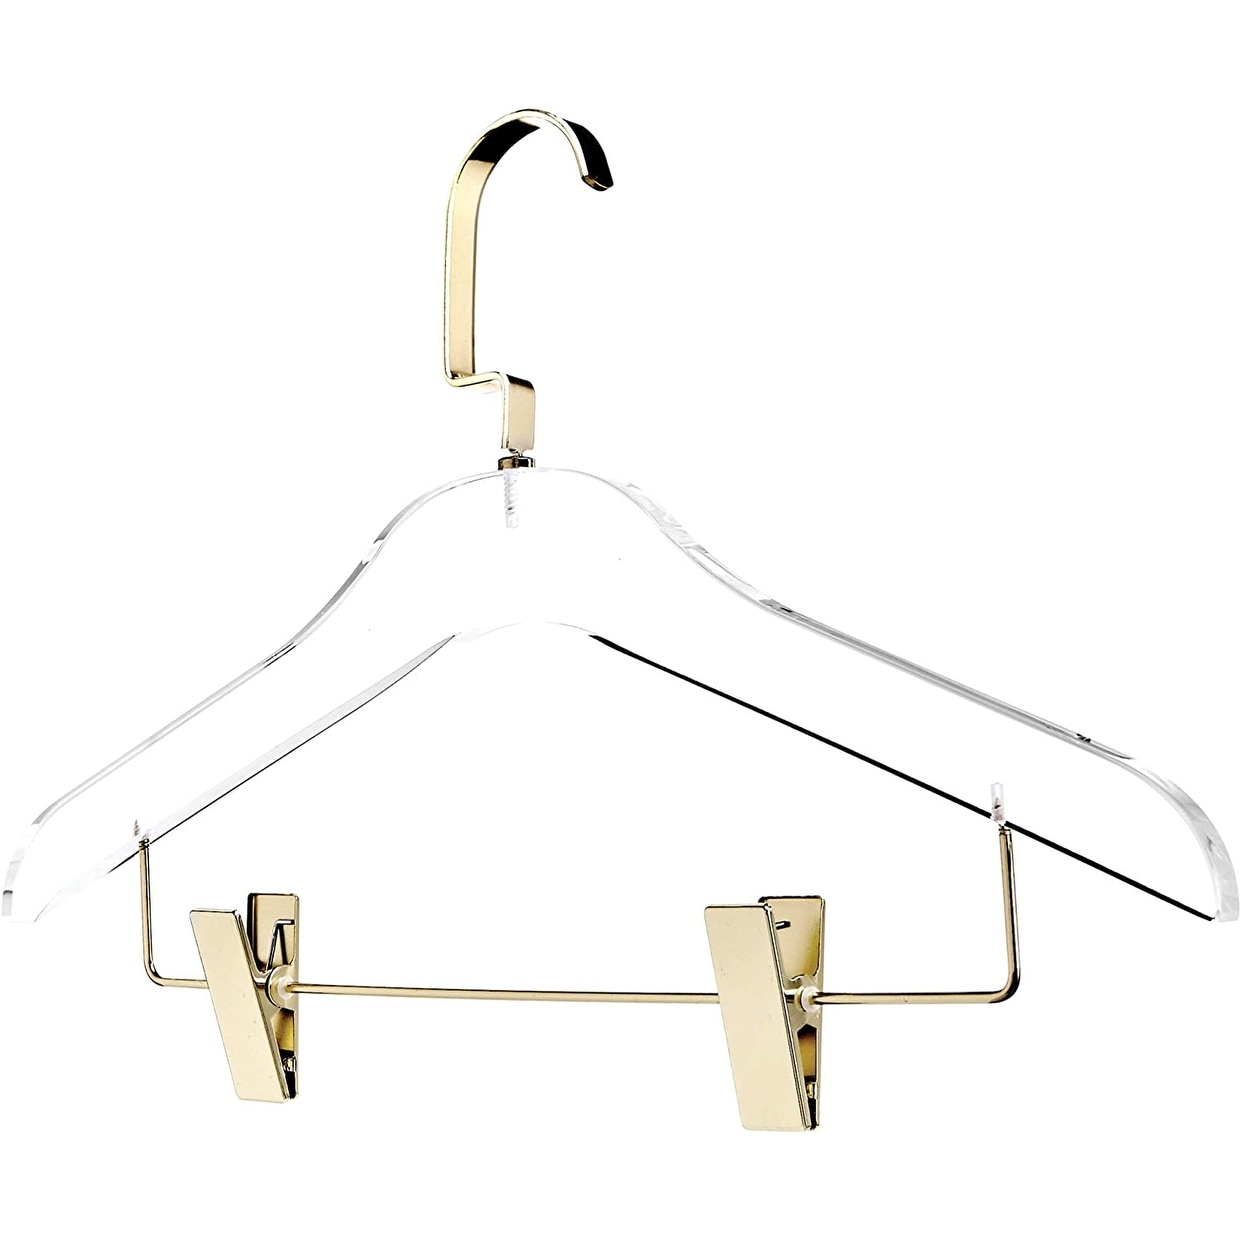 https://ak1.ostkcdn.com/images/products/is/images/direct/0023075c9e613a4965a12aad3a2e69d7945ccc3a/DesignStyles-Clear-Acrylic-Clothes-Hangers-w-Hanging-Clips---10-Pk.jpg